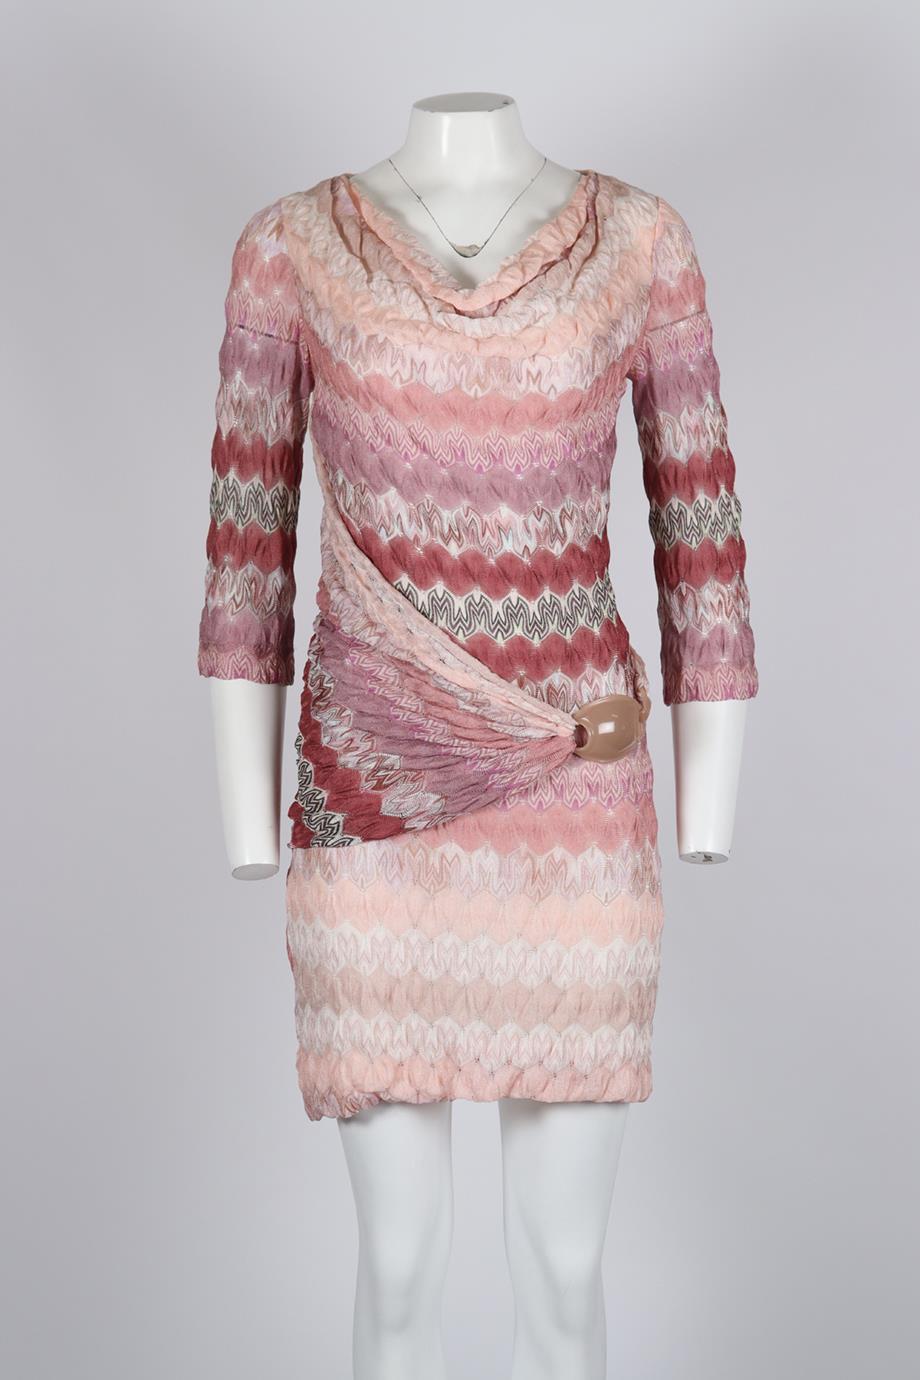 Missoni Belted Crochet Knit Dress. Pink. 3/4 Sleeve. Cowl Neck. Zip fastening - Side. 100% Rayon. UK 10 (US 6, FR 38, IT 42). Bust: 36 in. Waist: 32 in. Hips: 40 in. Length: 35 in. Condition: Used. Very good condition - Light signs of wear; see